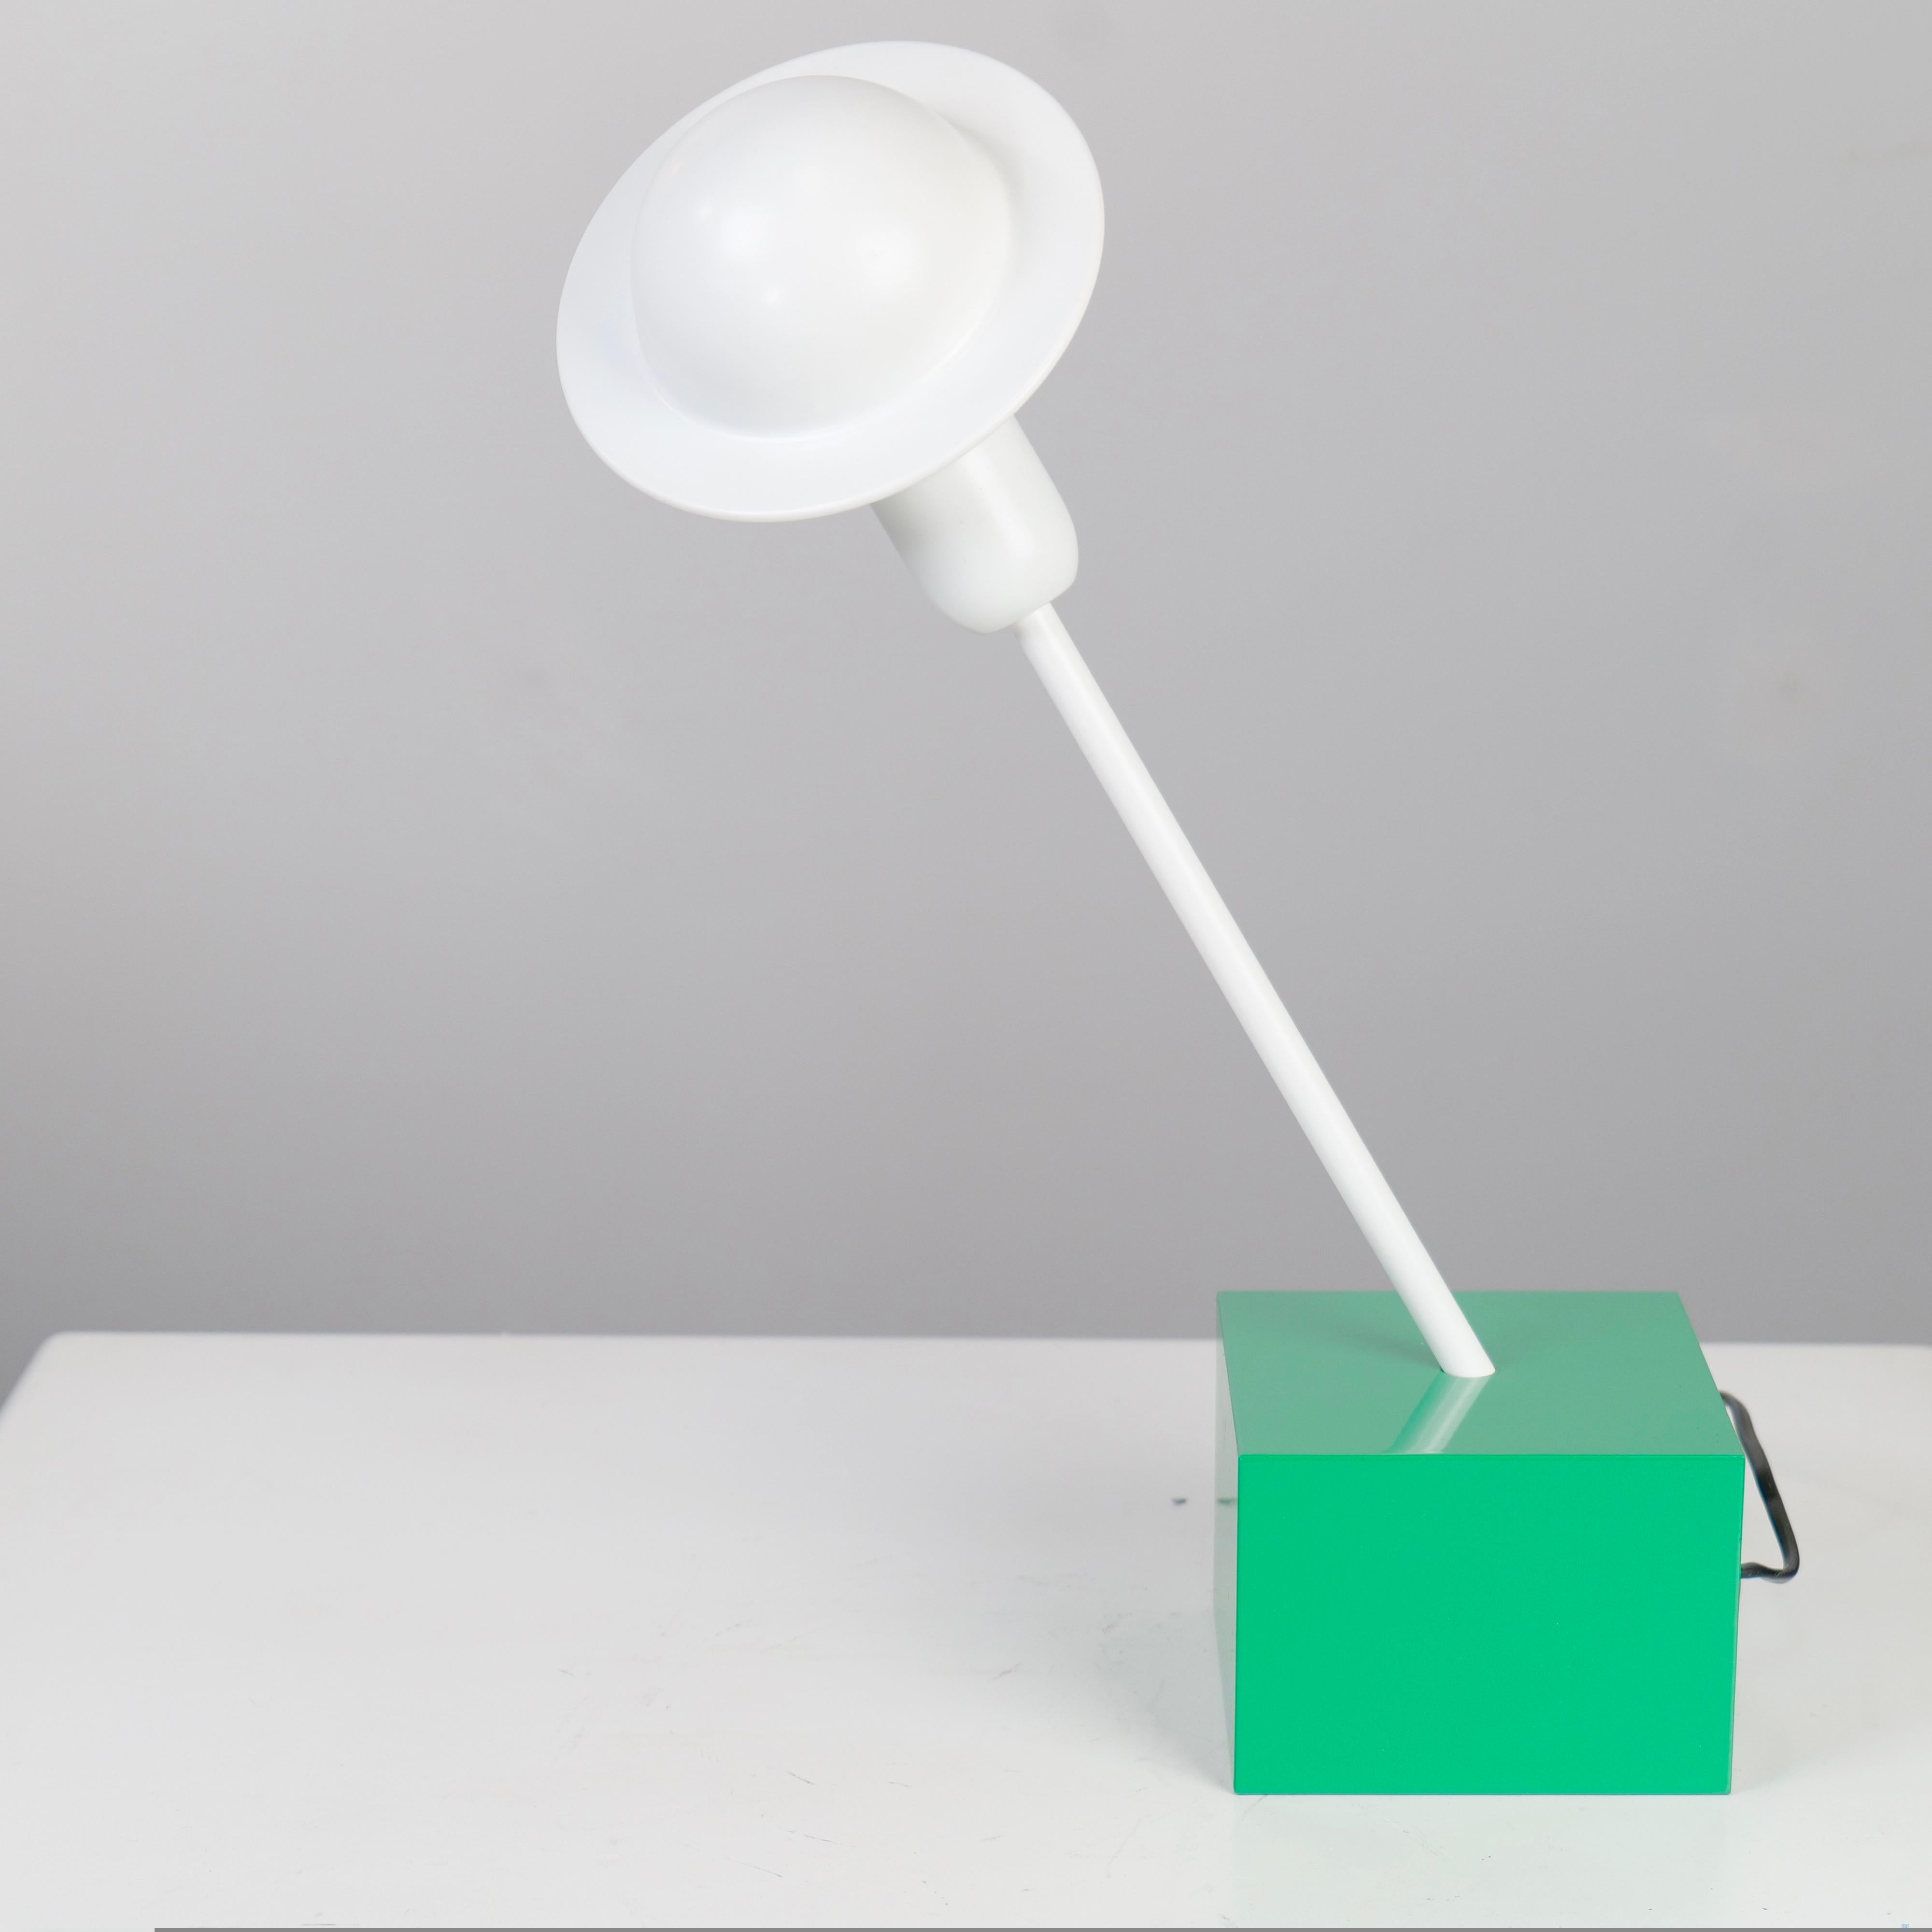 Iconic Don Lamp by Ettore Sottsass for Stilnovo from Deadstock (new condition)

Ettore Sottsass is known for his radical italian design.



1977 - Made in Italy 


Dimensions:
44 cm heigh
30 cm width
13 cm depth
Materials:
lacquered